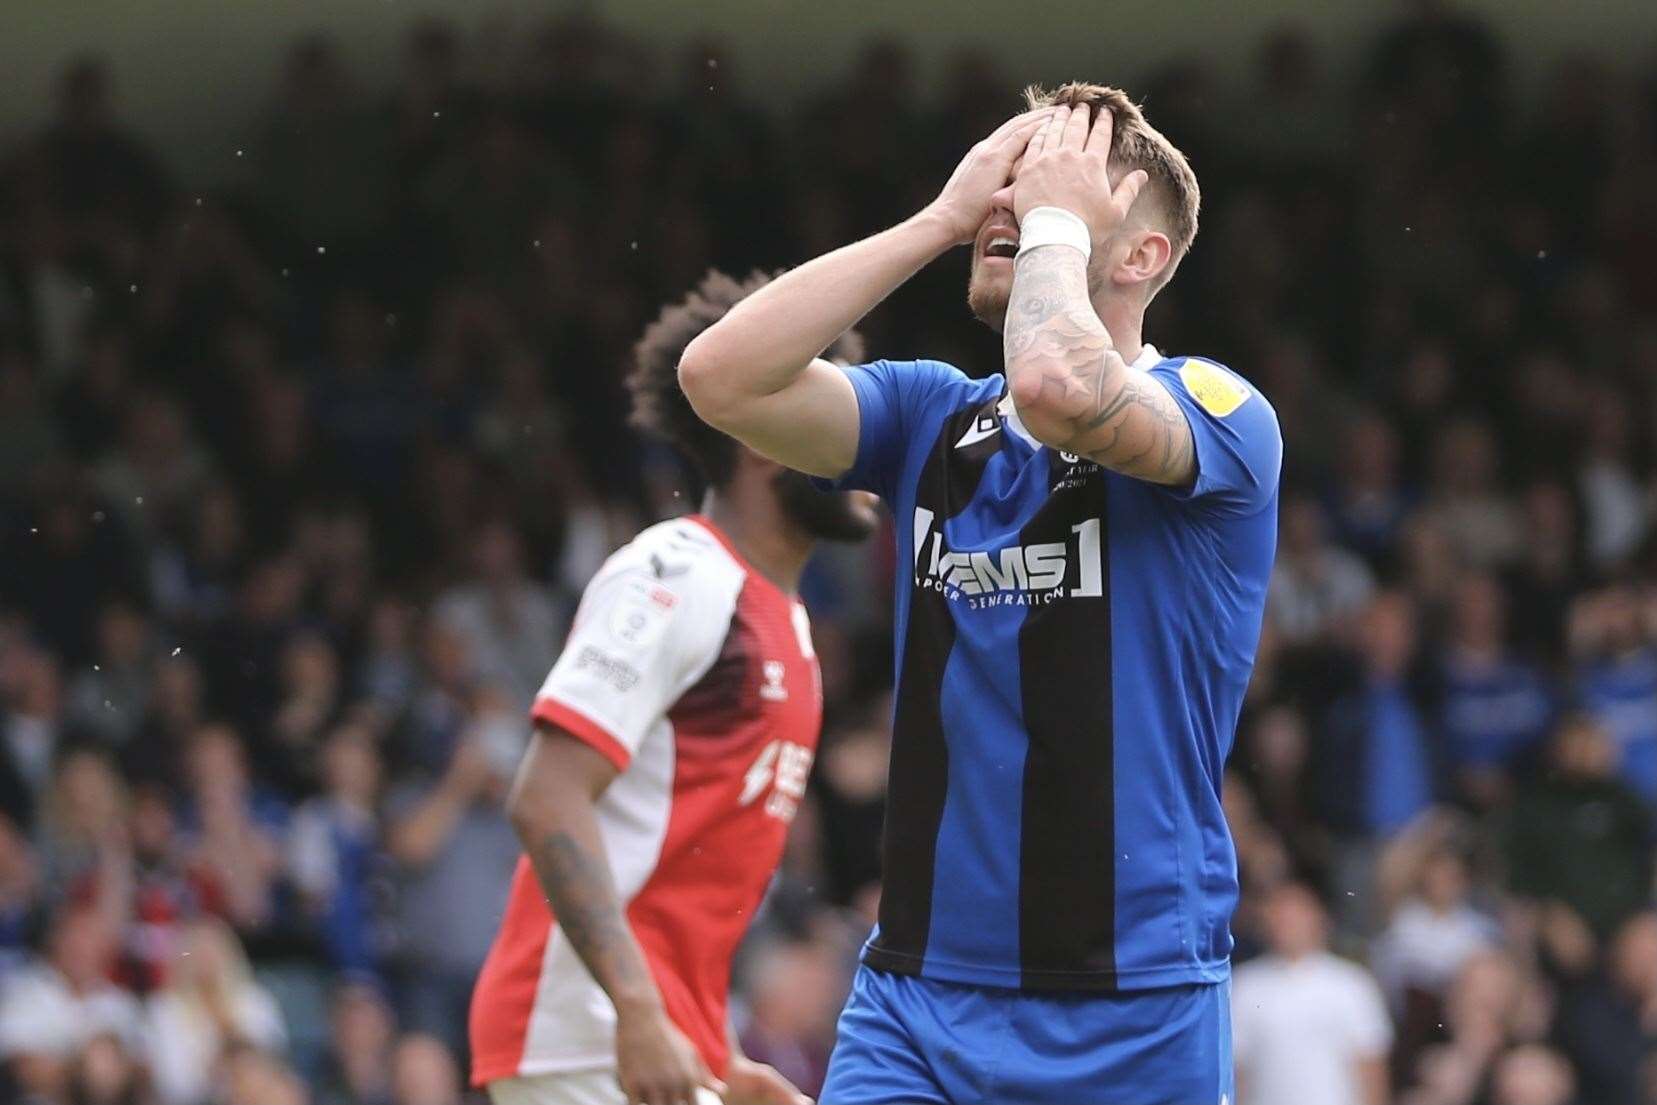 A frustrating day for Charlie Kelman and the Gills Picture: KPI